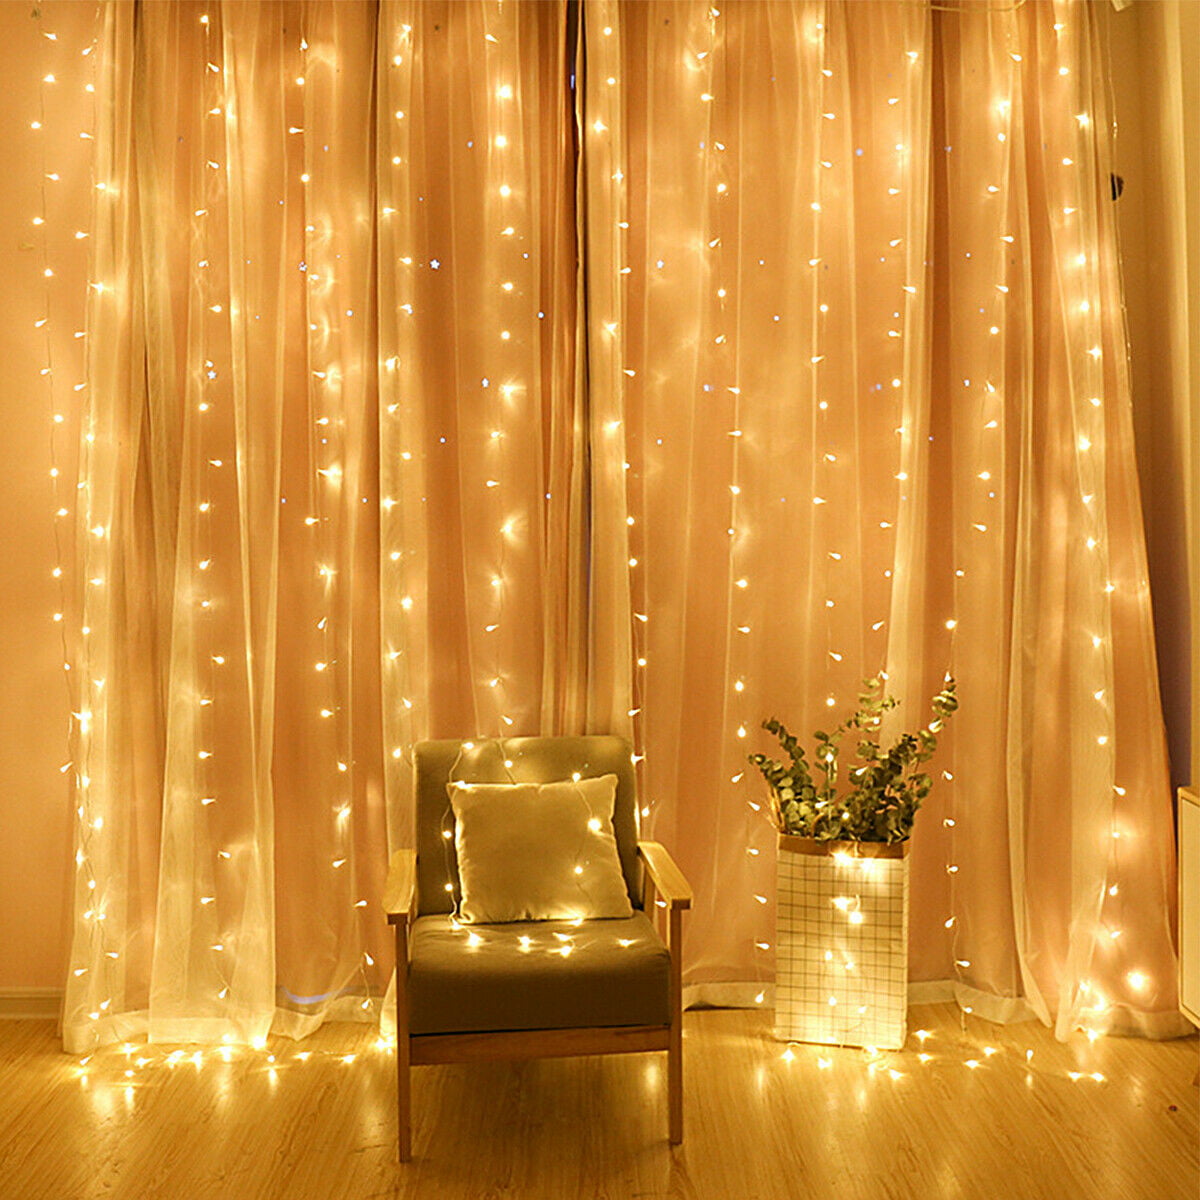 Christmas Decorations for Home 3m Curtain String Light Flash Fairy Garland Decor